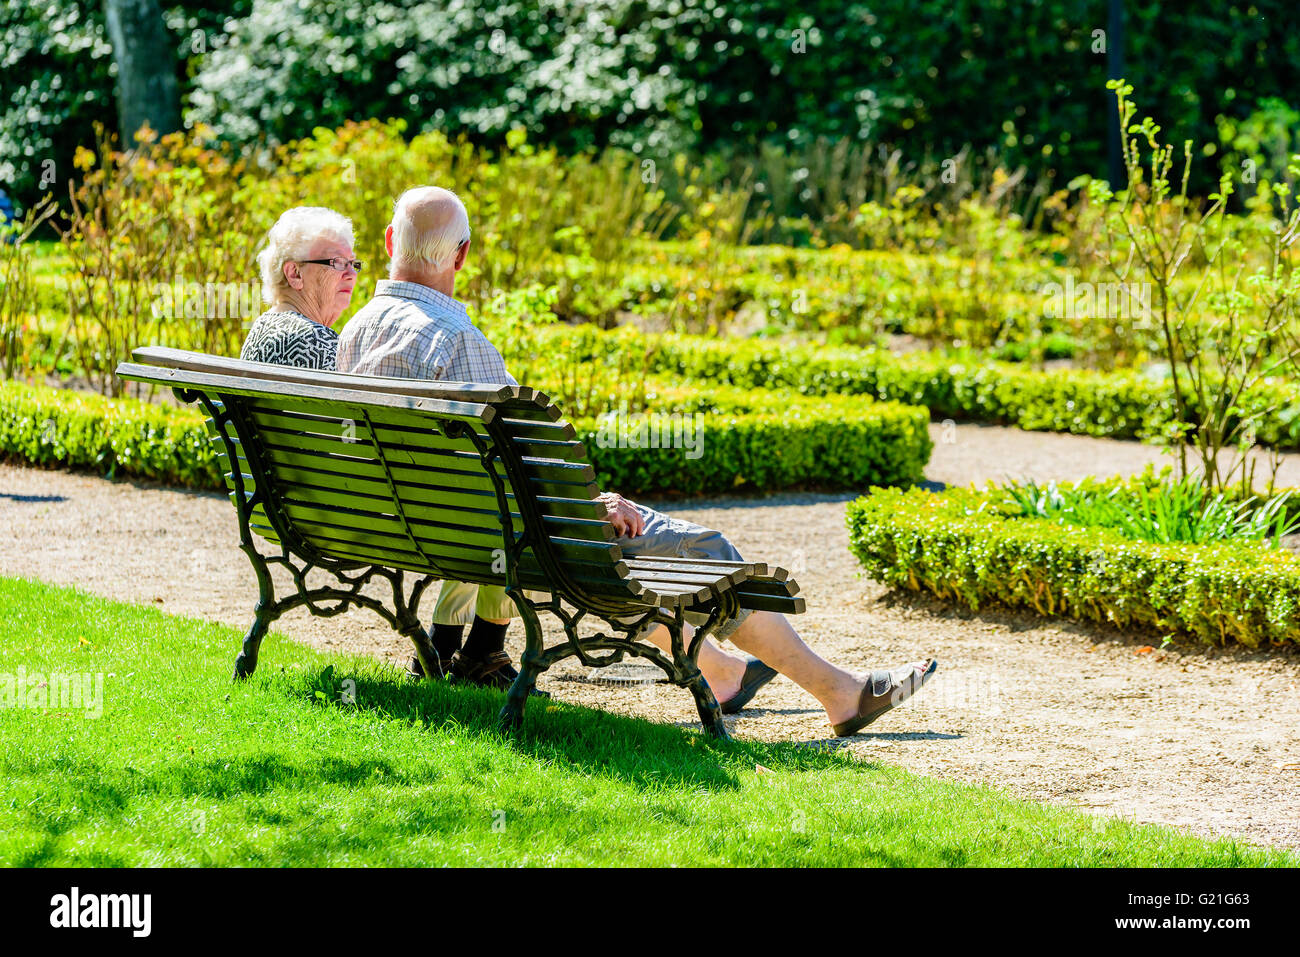 Ronneby, Sweden - May 8, 2016: Real people in everyday life. Here two senior persons rest on a park bench in the sunshine. Stock Photo